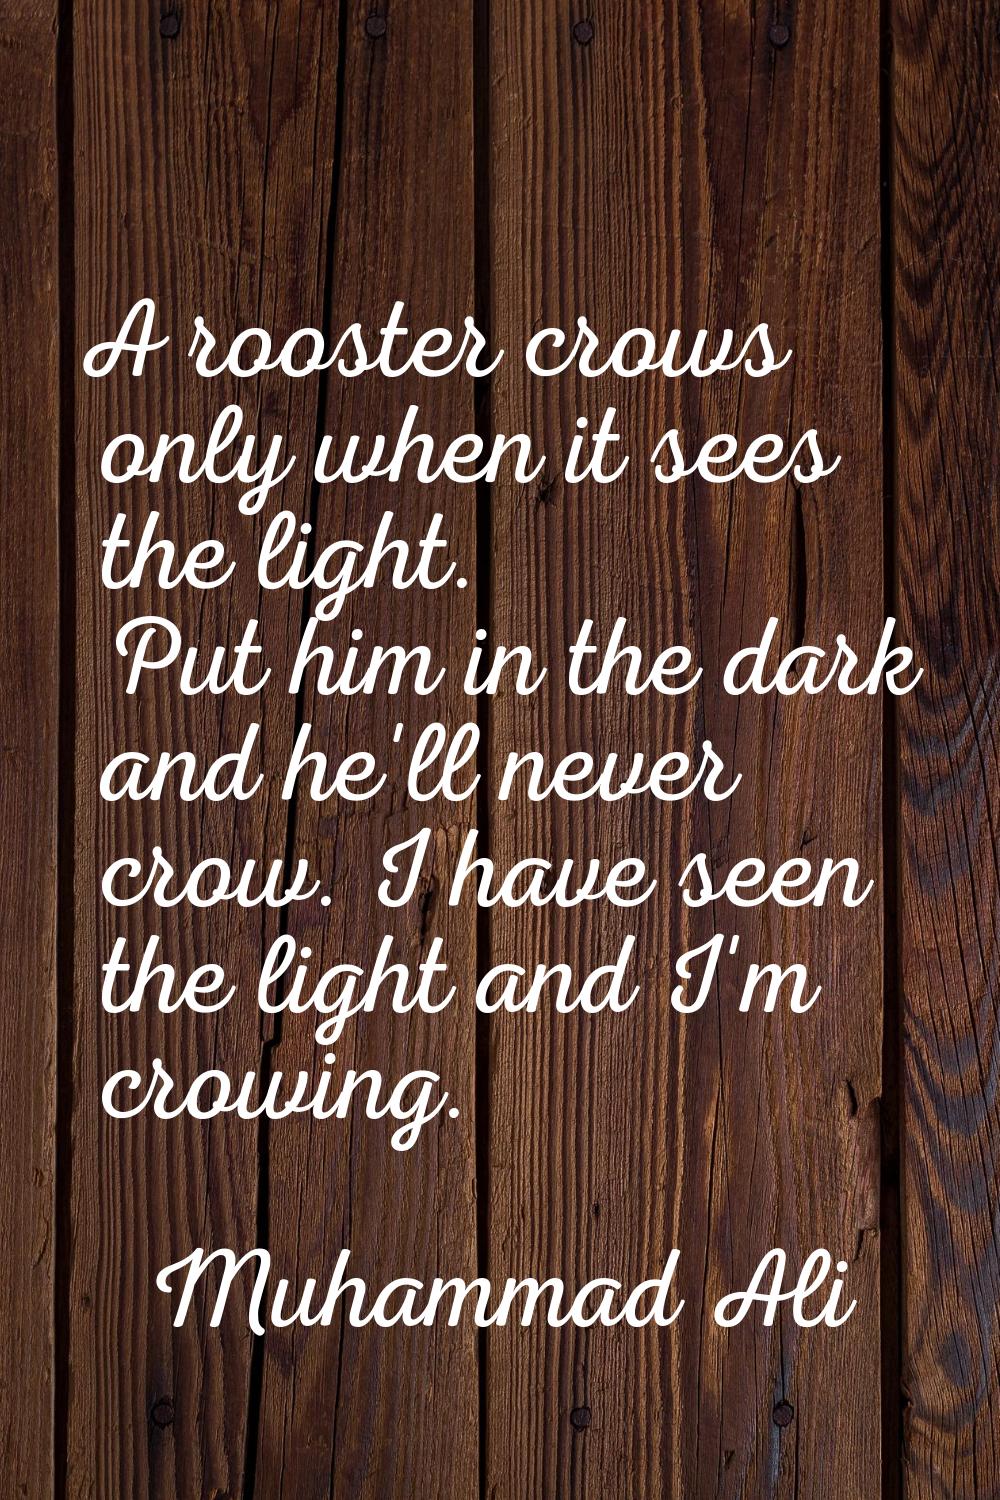 A rooster crows only when it sees the light. Put him in the dark and he'll never crow. I have seen 